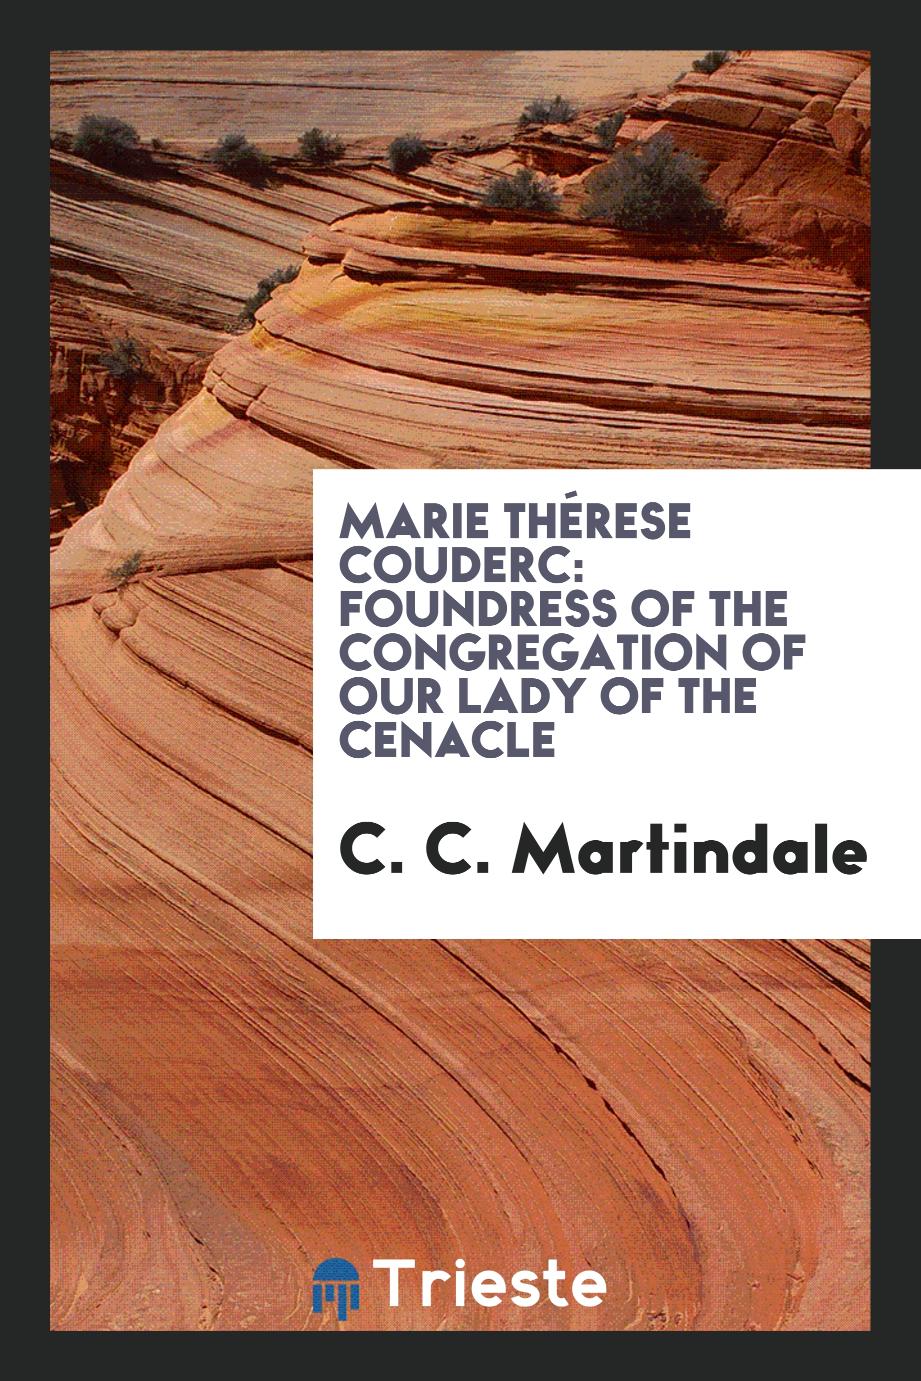 Marie Thérese Couderc: foundress of the Congregation of Our Lady of the Cenacle